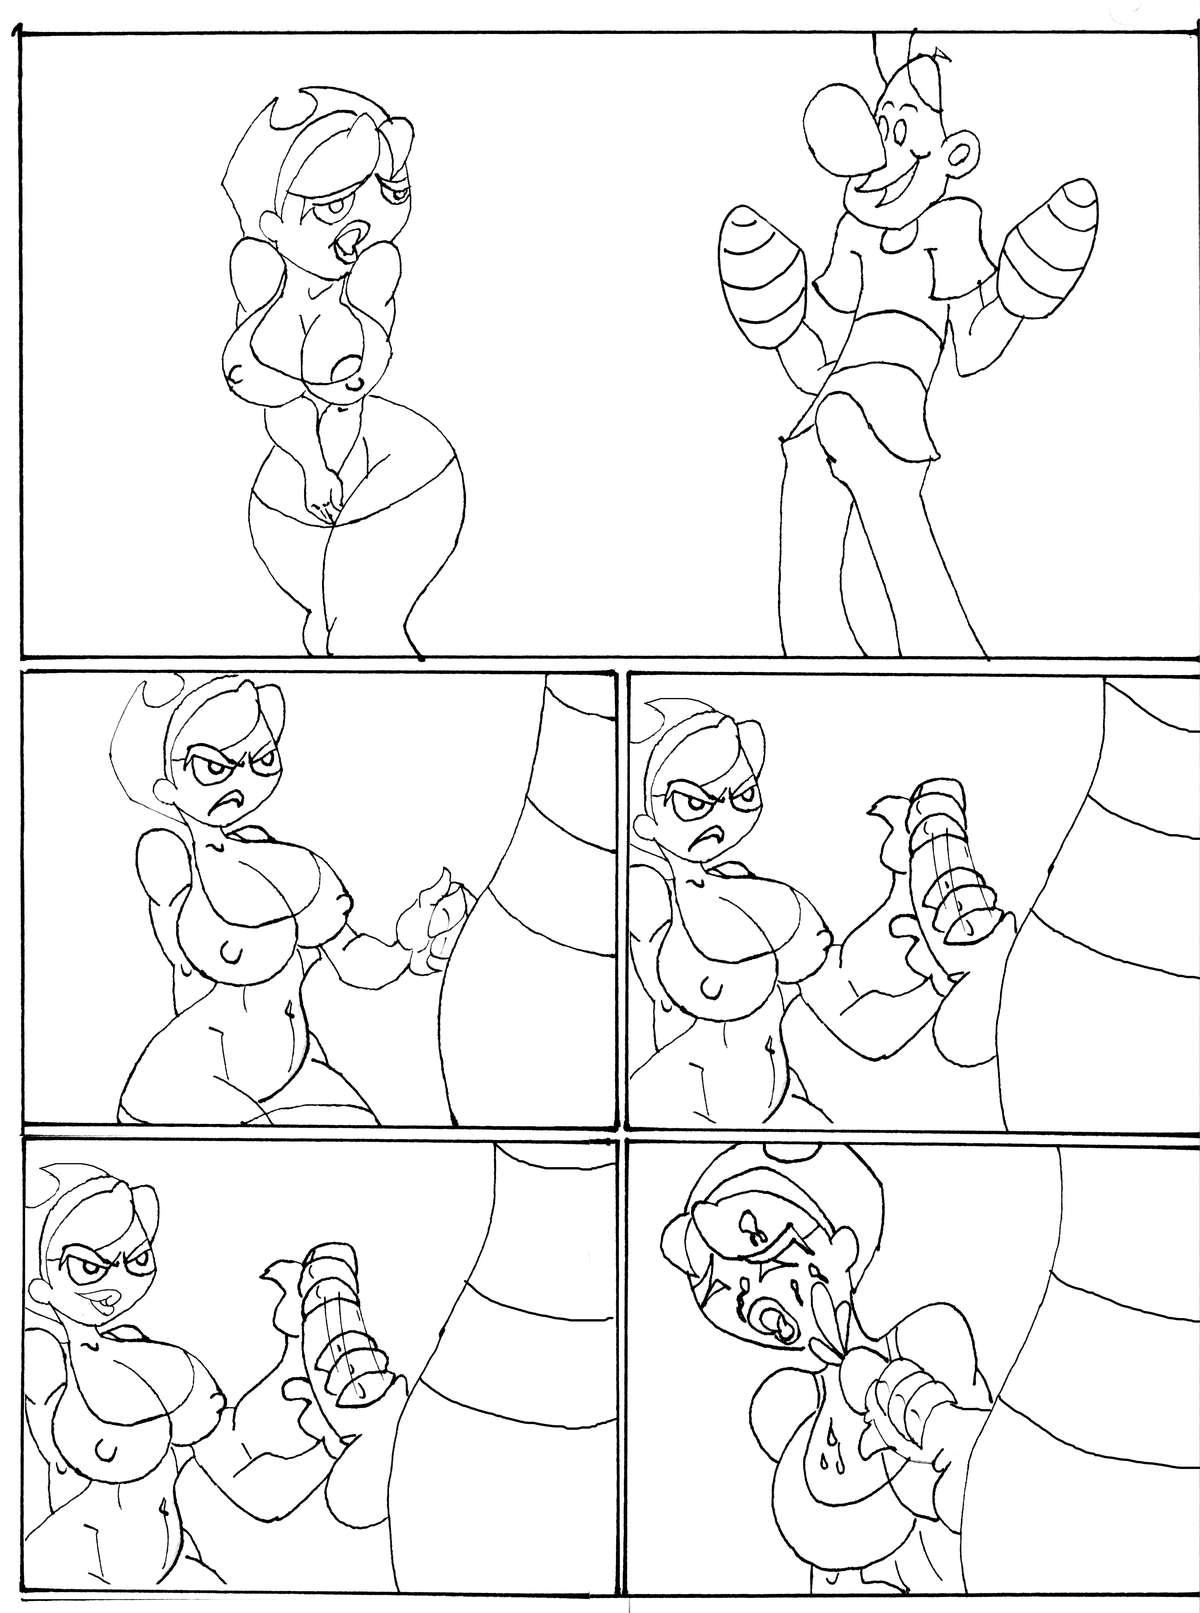 Pussylick billy y mandy - The grim adventures of billy and mandy Tranny Sex - Page 5